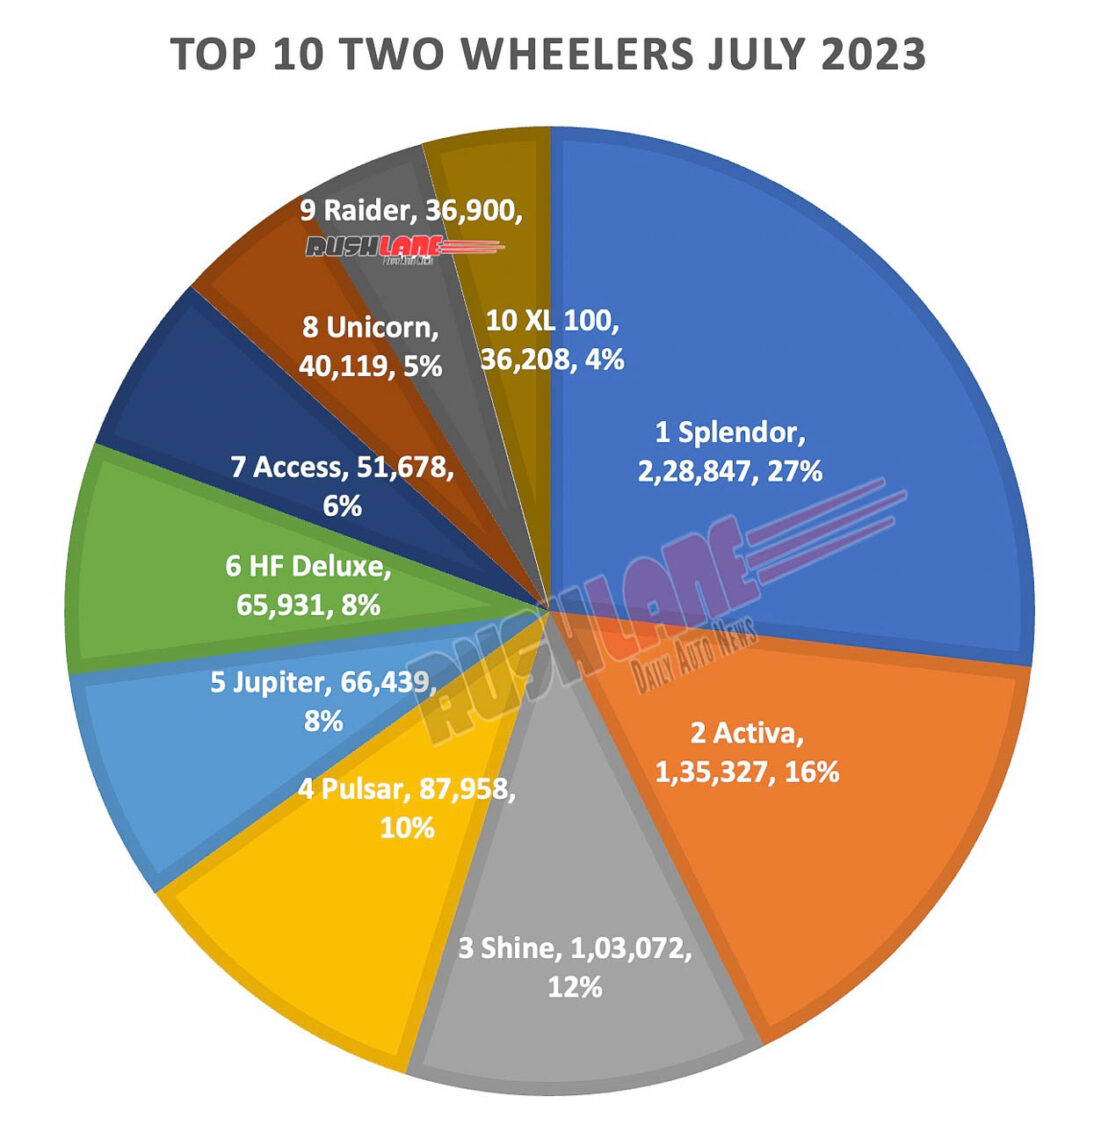 Top 10 Two Wheelers July 2023